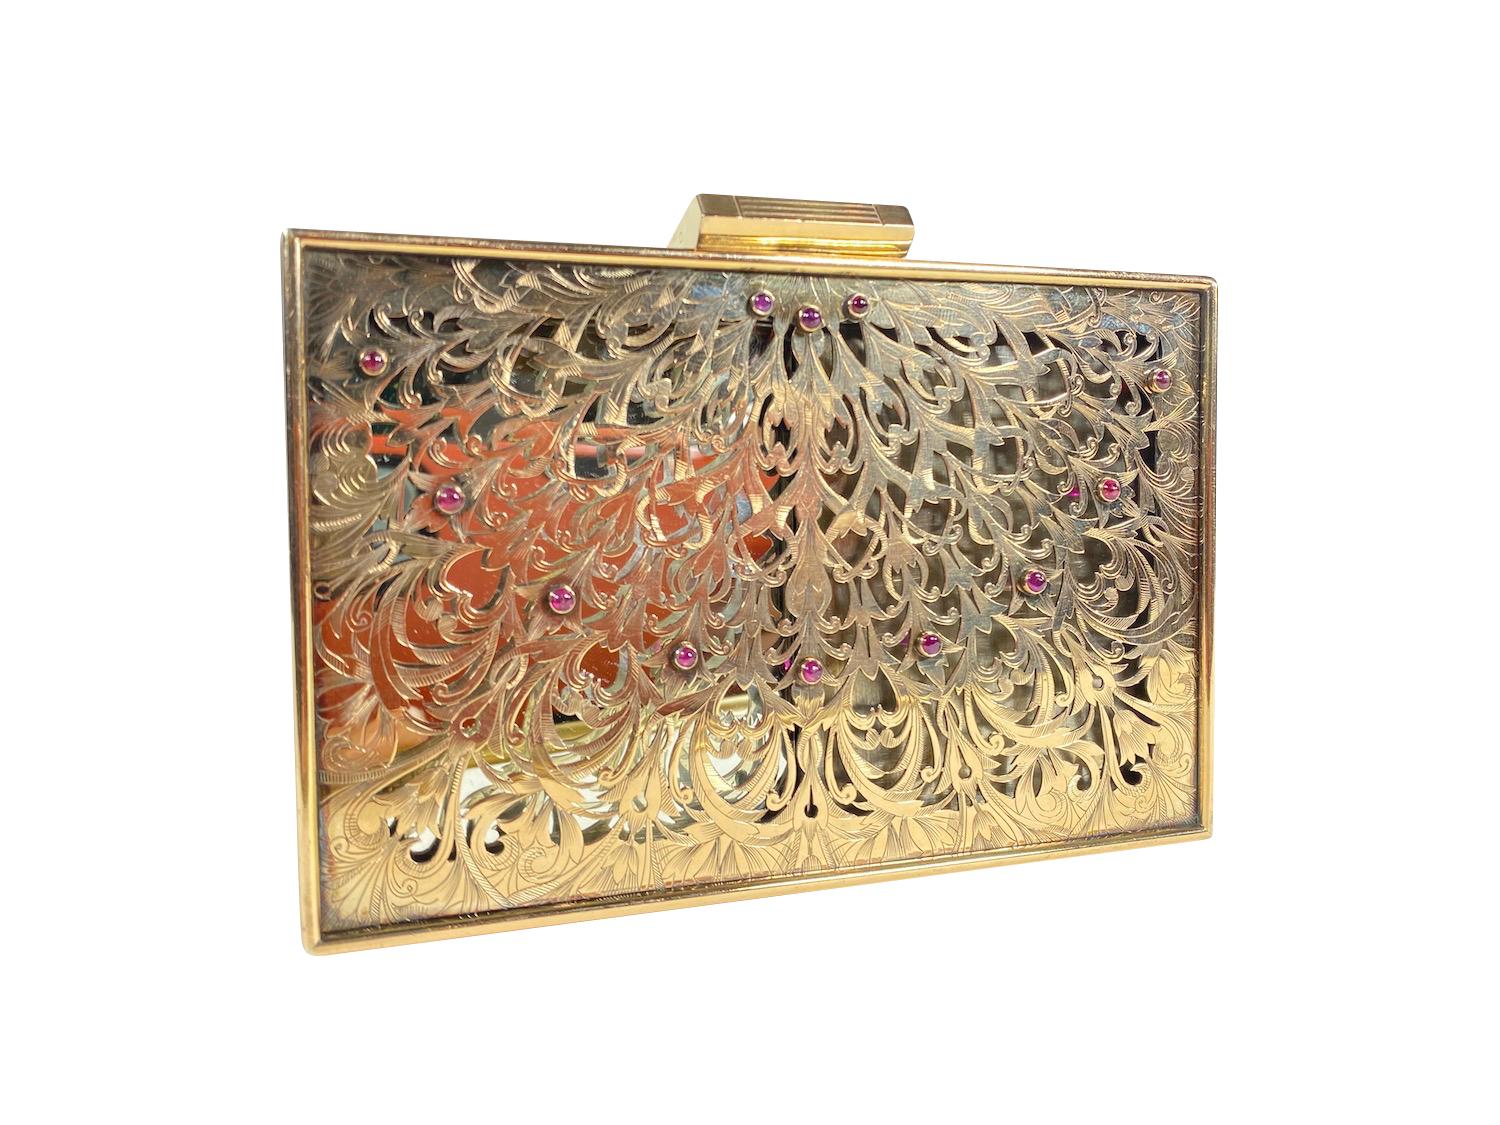  A Boucheron Paris 18k Gold  Silver & Ruby Vermeil Minaudiere Circa 1940 In Excellent Condition For Sale In Los Angeles, CA